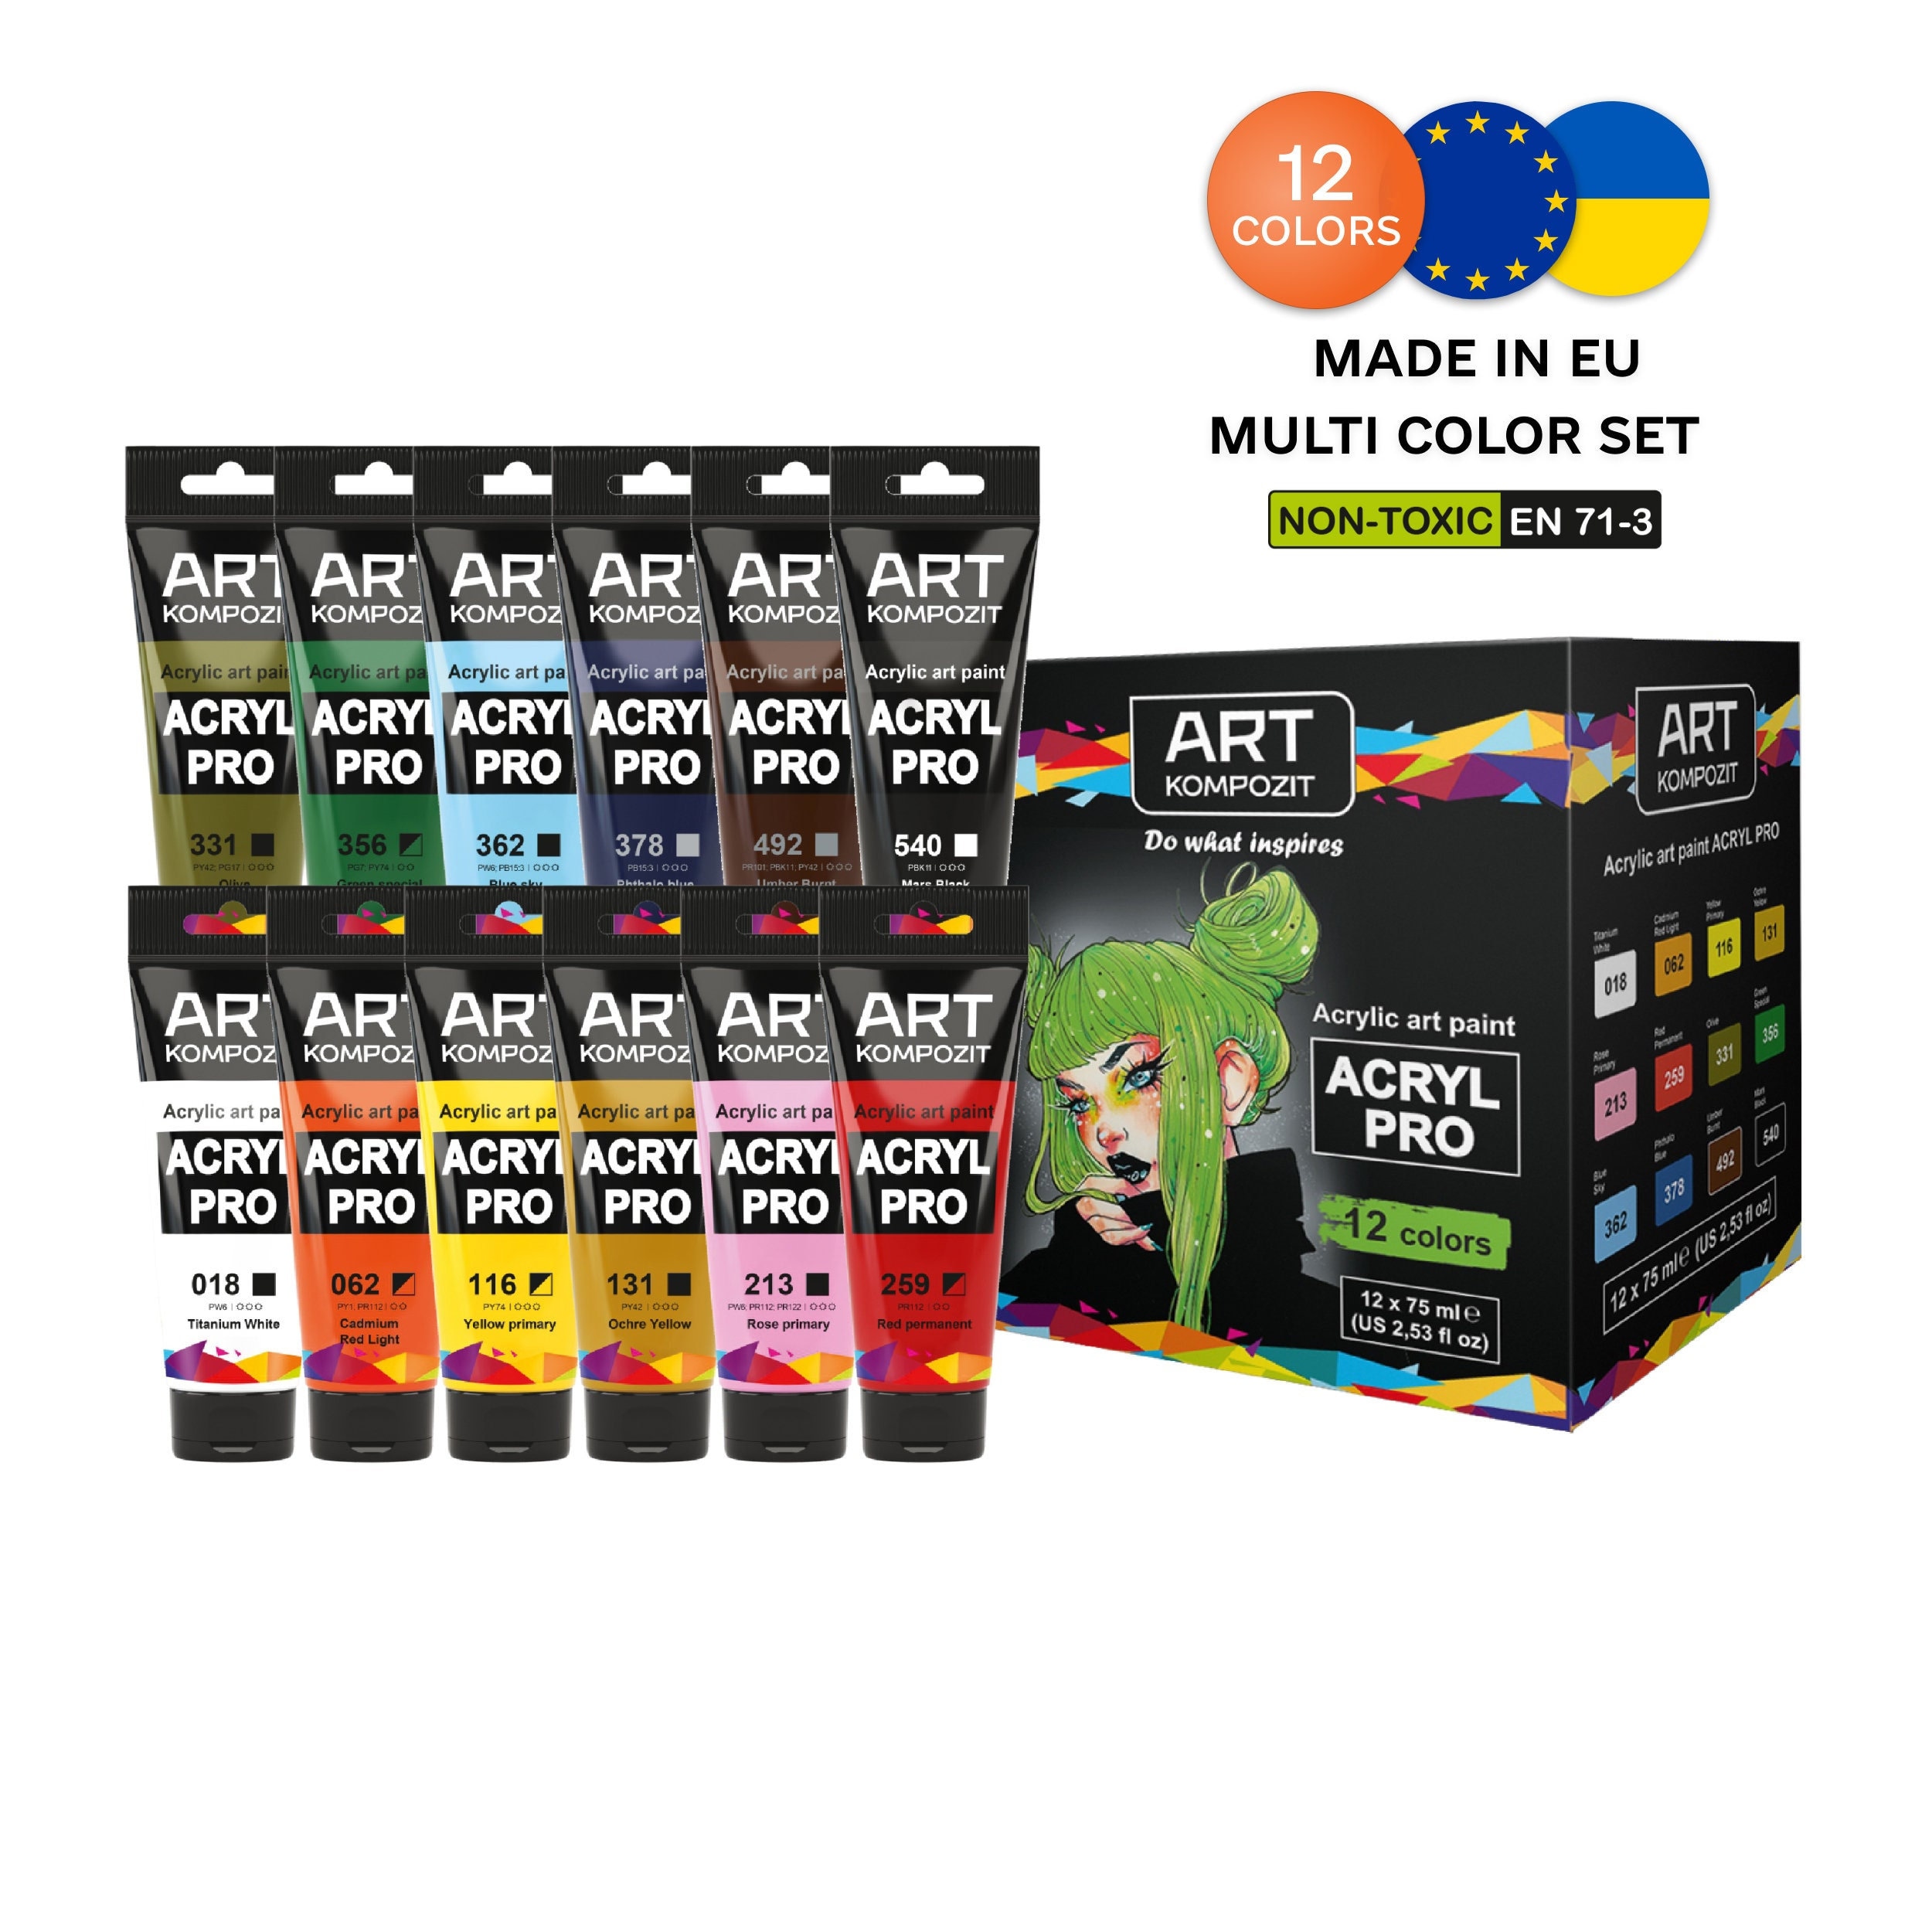 milo Fluorescent Acrylic Paint Set of 6 Colors | 4 oz Bottles | Student  Neon Colors Acrylics Painting Pack | Made in the USA | Non-Toxic Art &  Craft